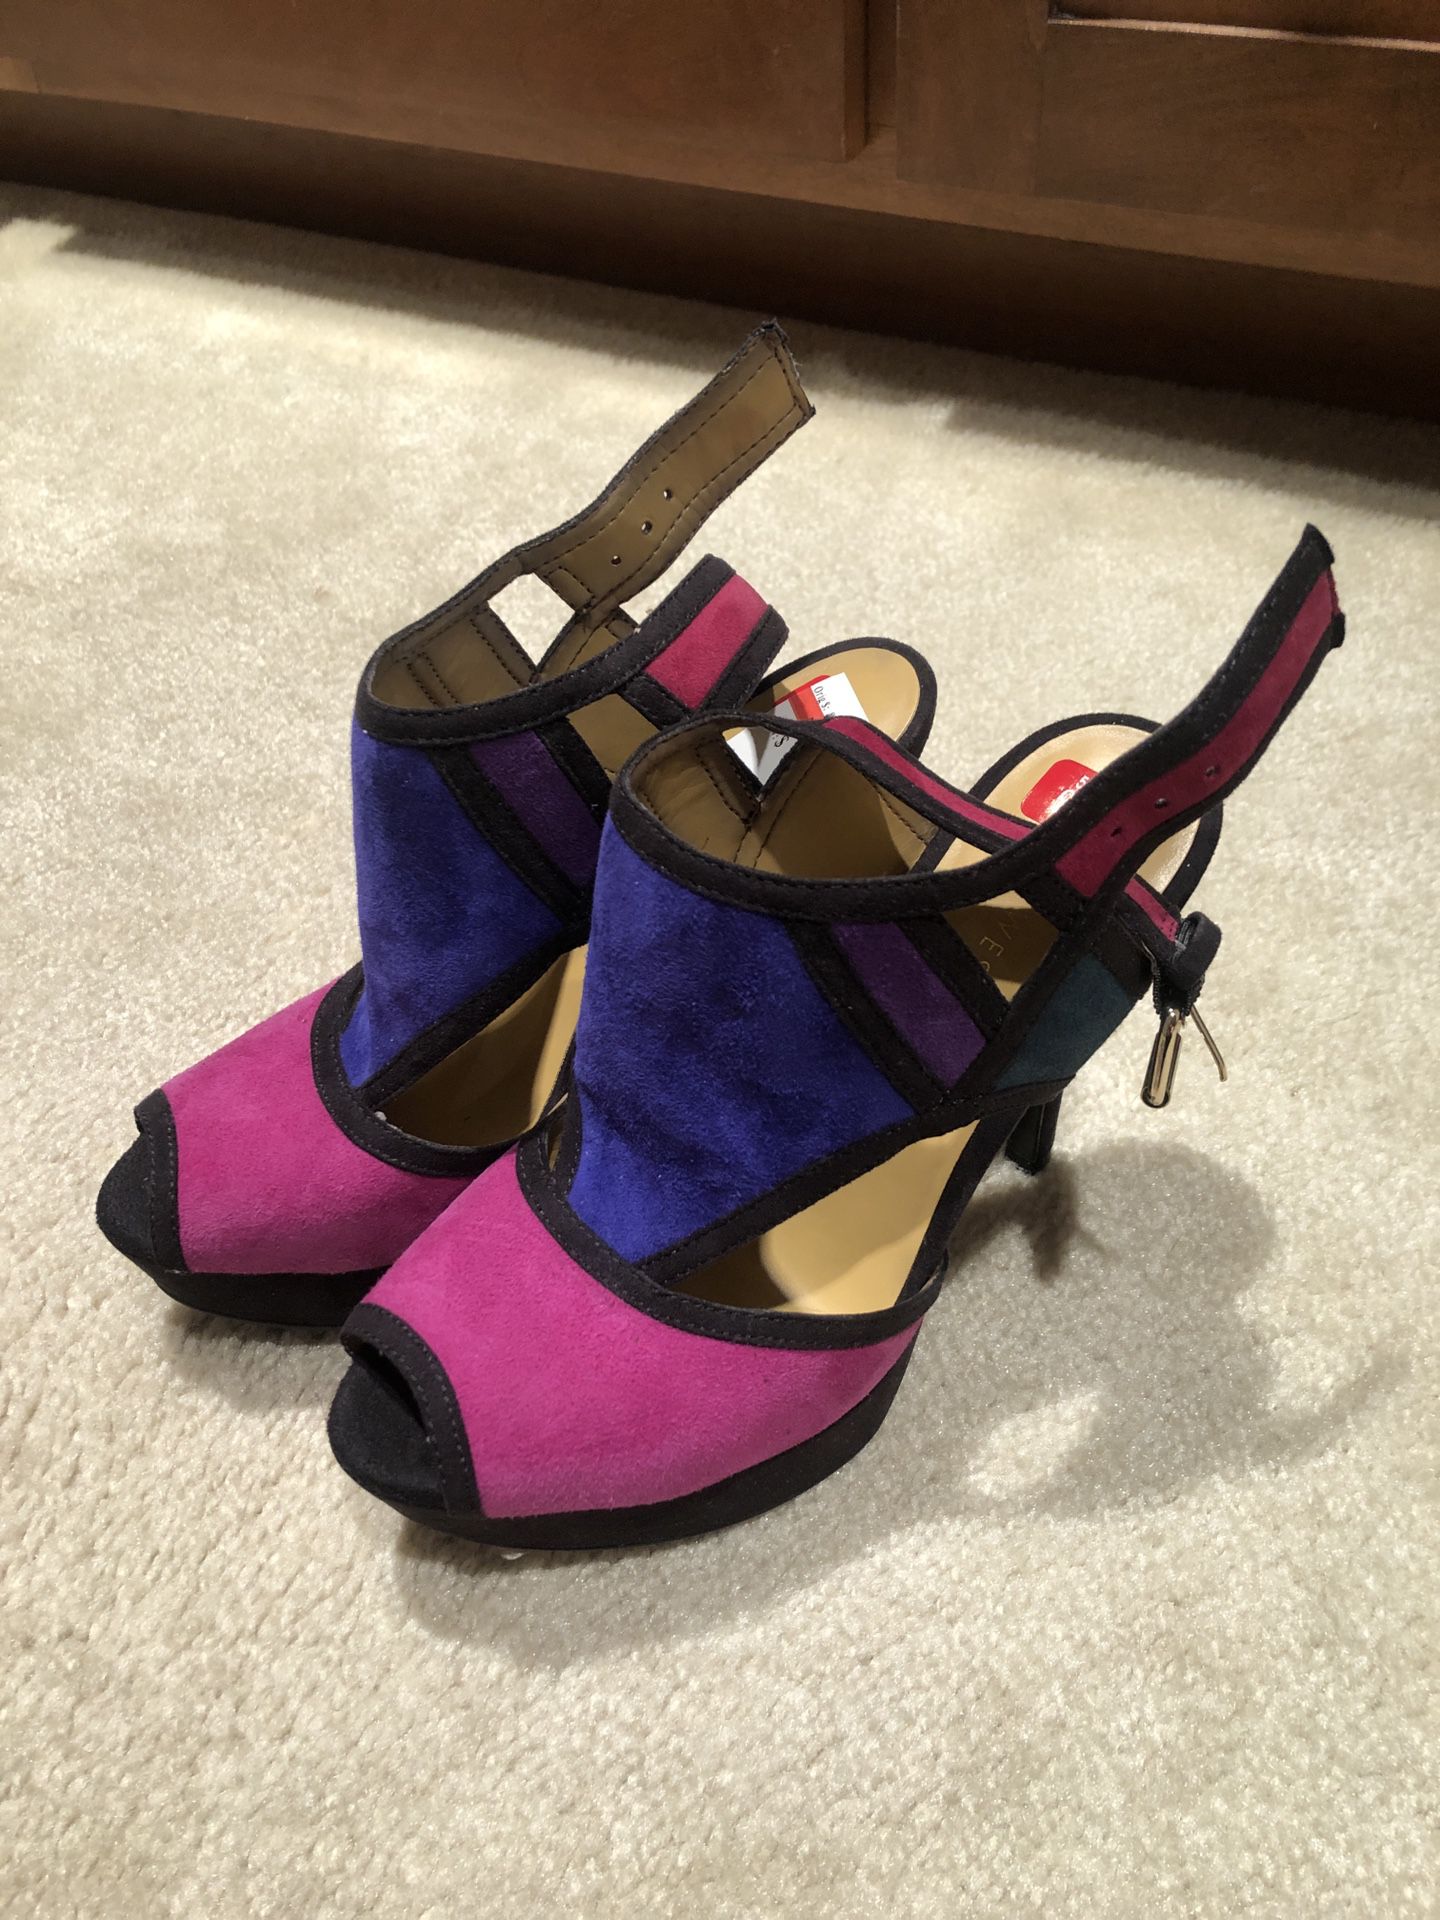 3” Lavender And Hot Pink Heels